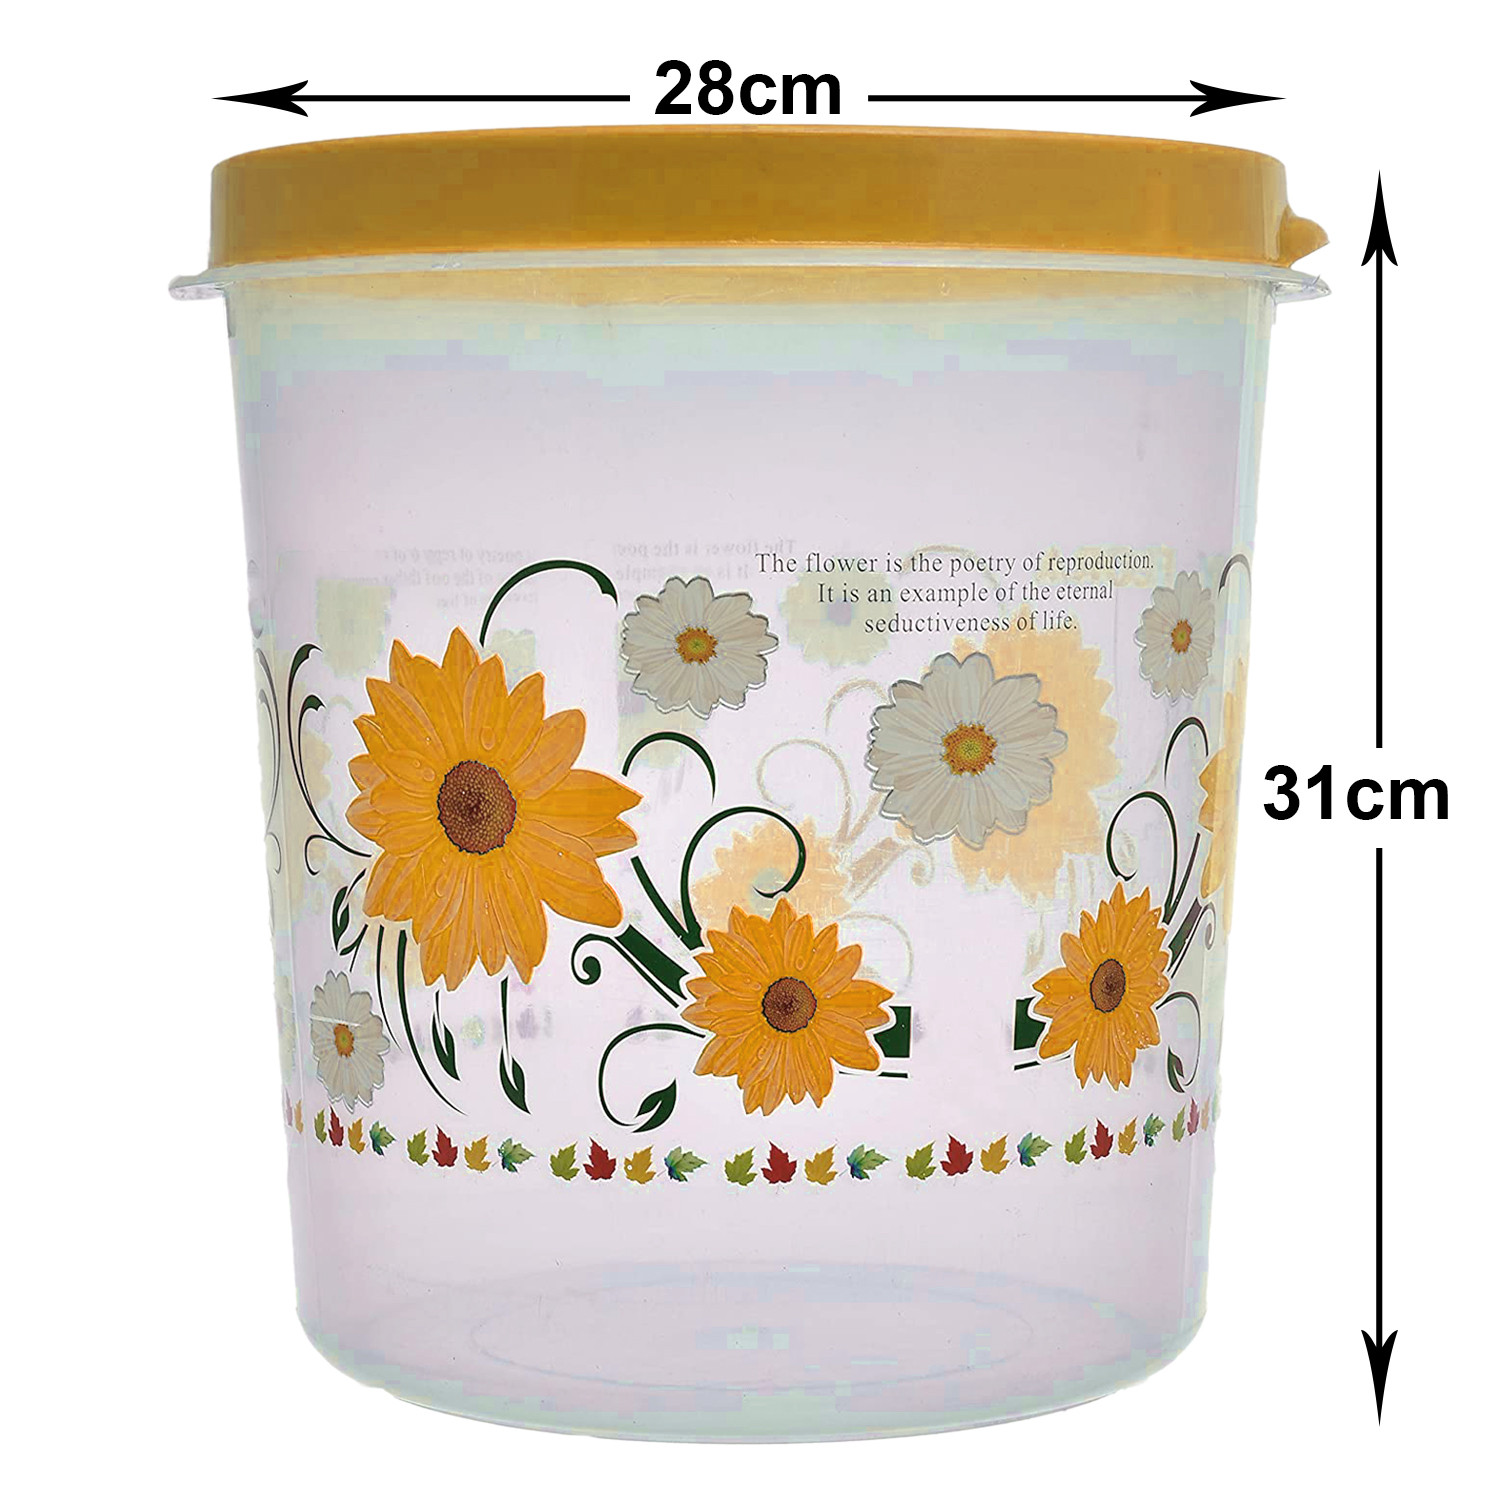 Kuber Industries Storage Container|Durable Plastic Floral Design BPA Free Food Kitchen Organizer With Lid|Food Utility Jar, 16 Ltr (Yellow)